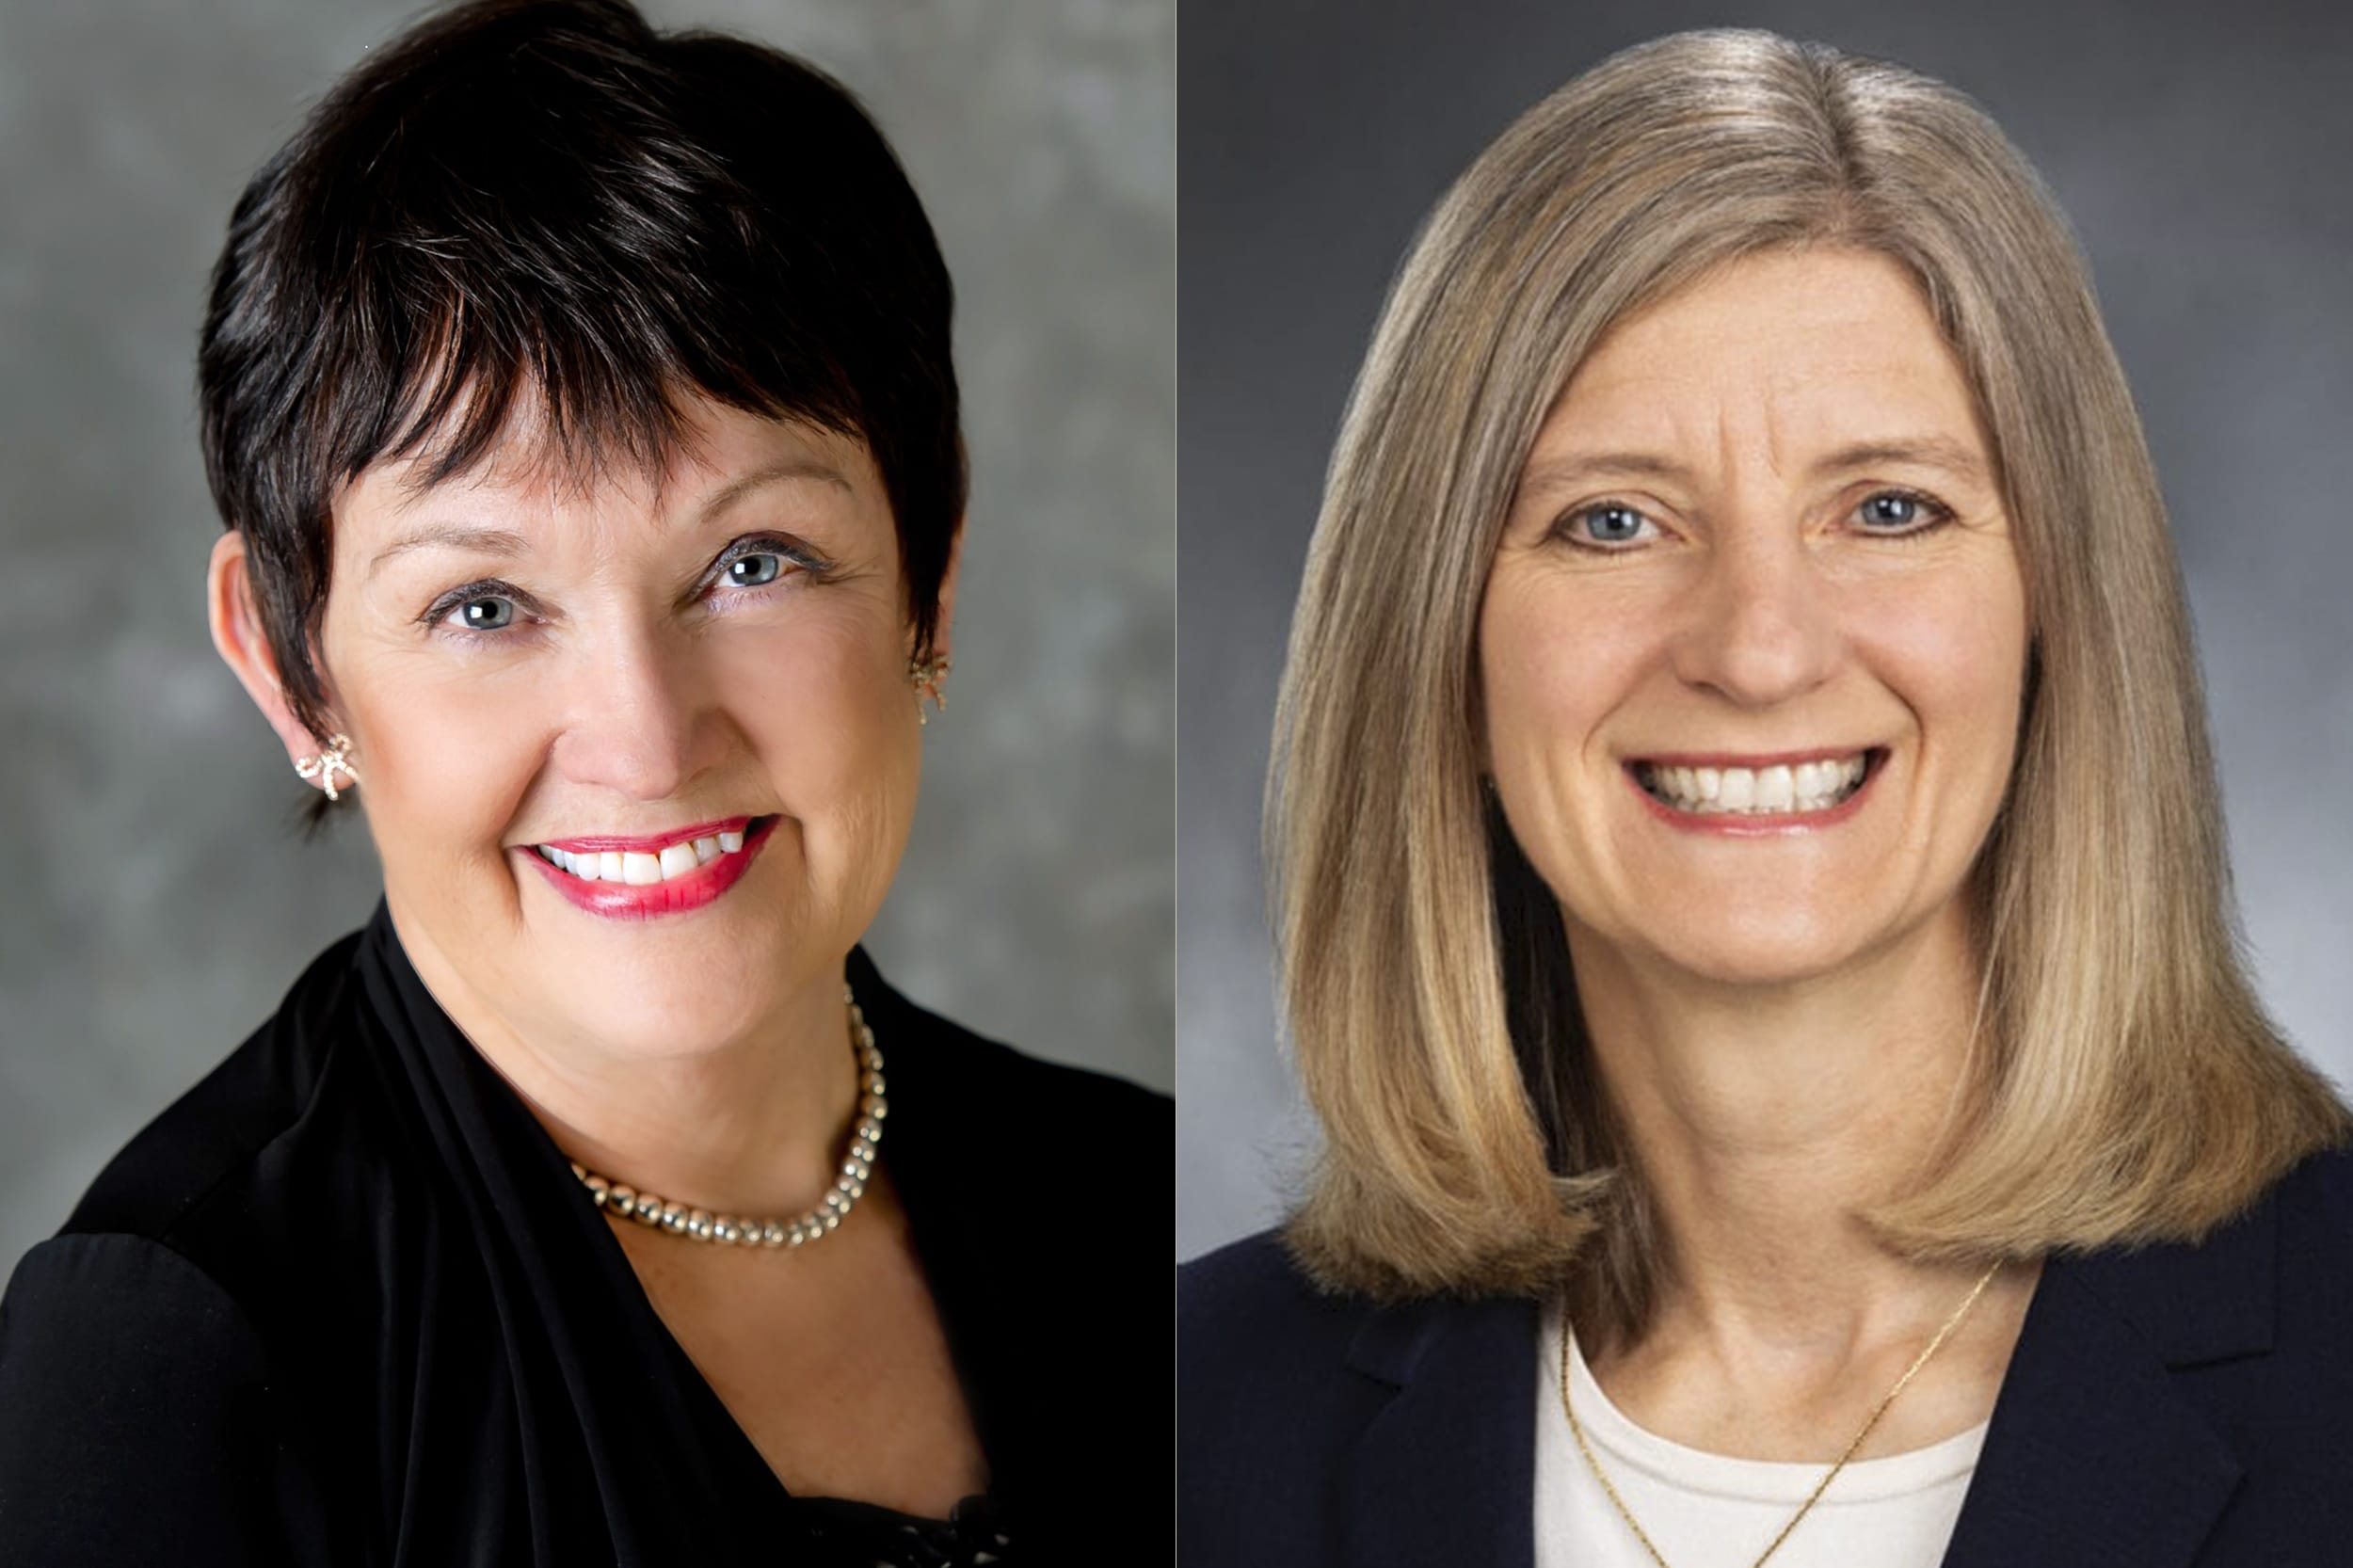 Karen Bowerman, left, won the race for the Clark County Council District 3 seat; Rep. Vicki Kraft, R-Vancouver, has been reelected to her 17th District House seat.